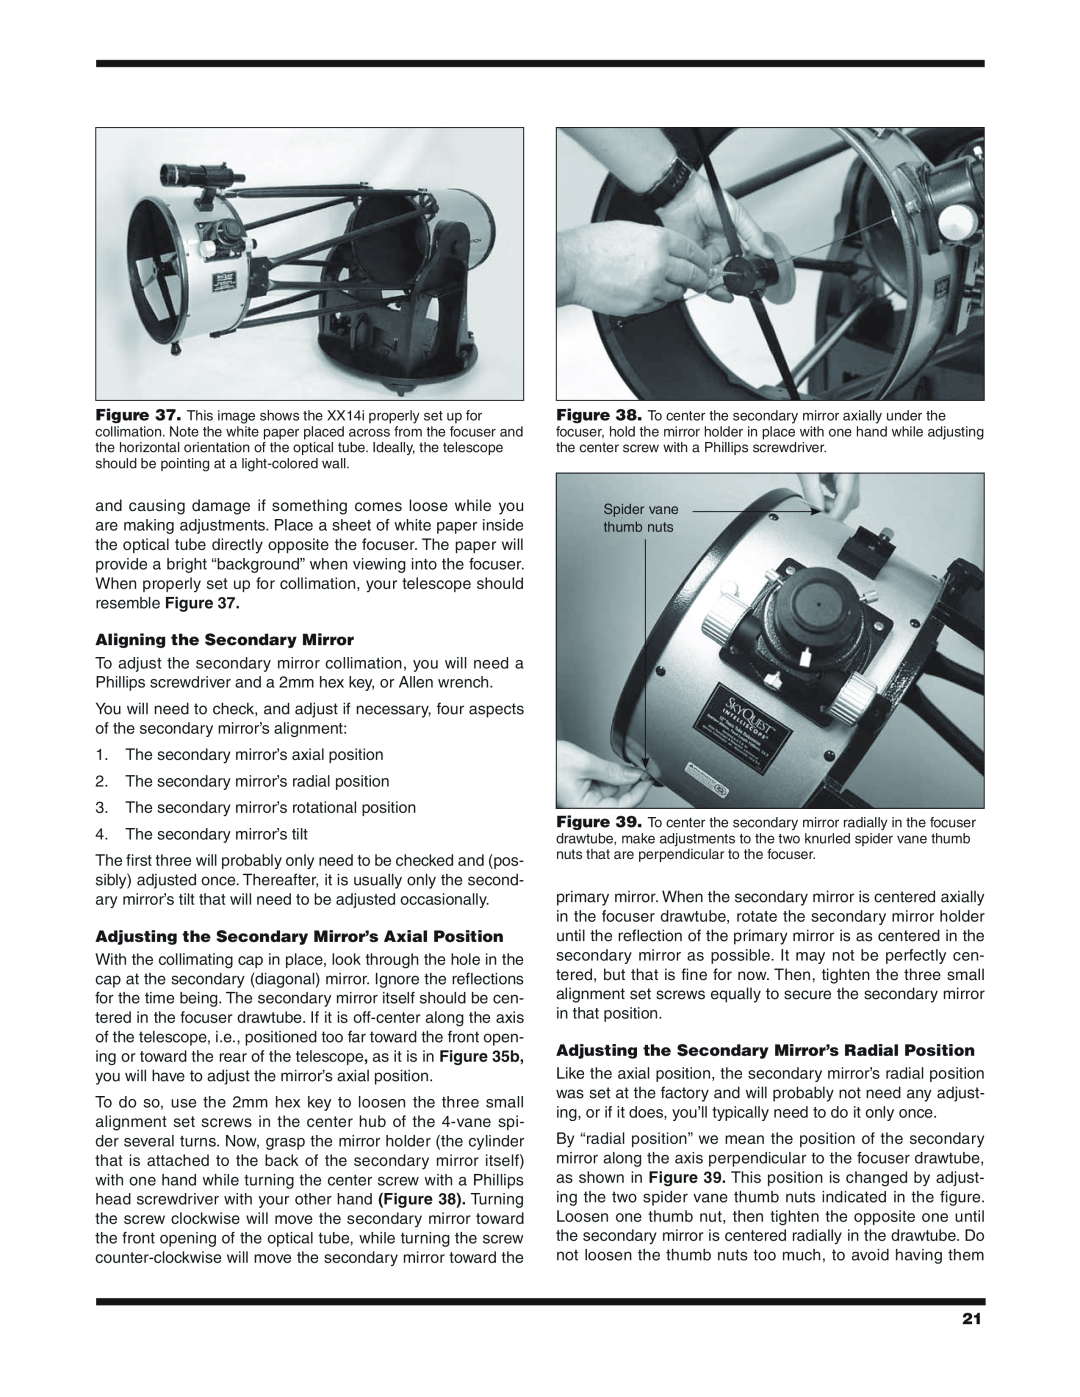 Orion XX14I instruction manual Aligning the Secondary Mirror, Adjusting the Secondary Mirror’s Axial Position 